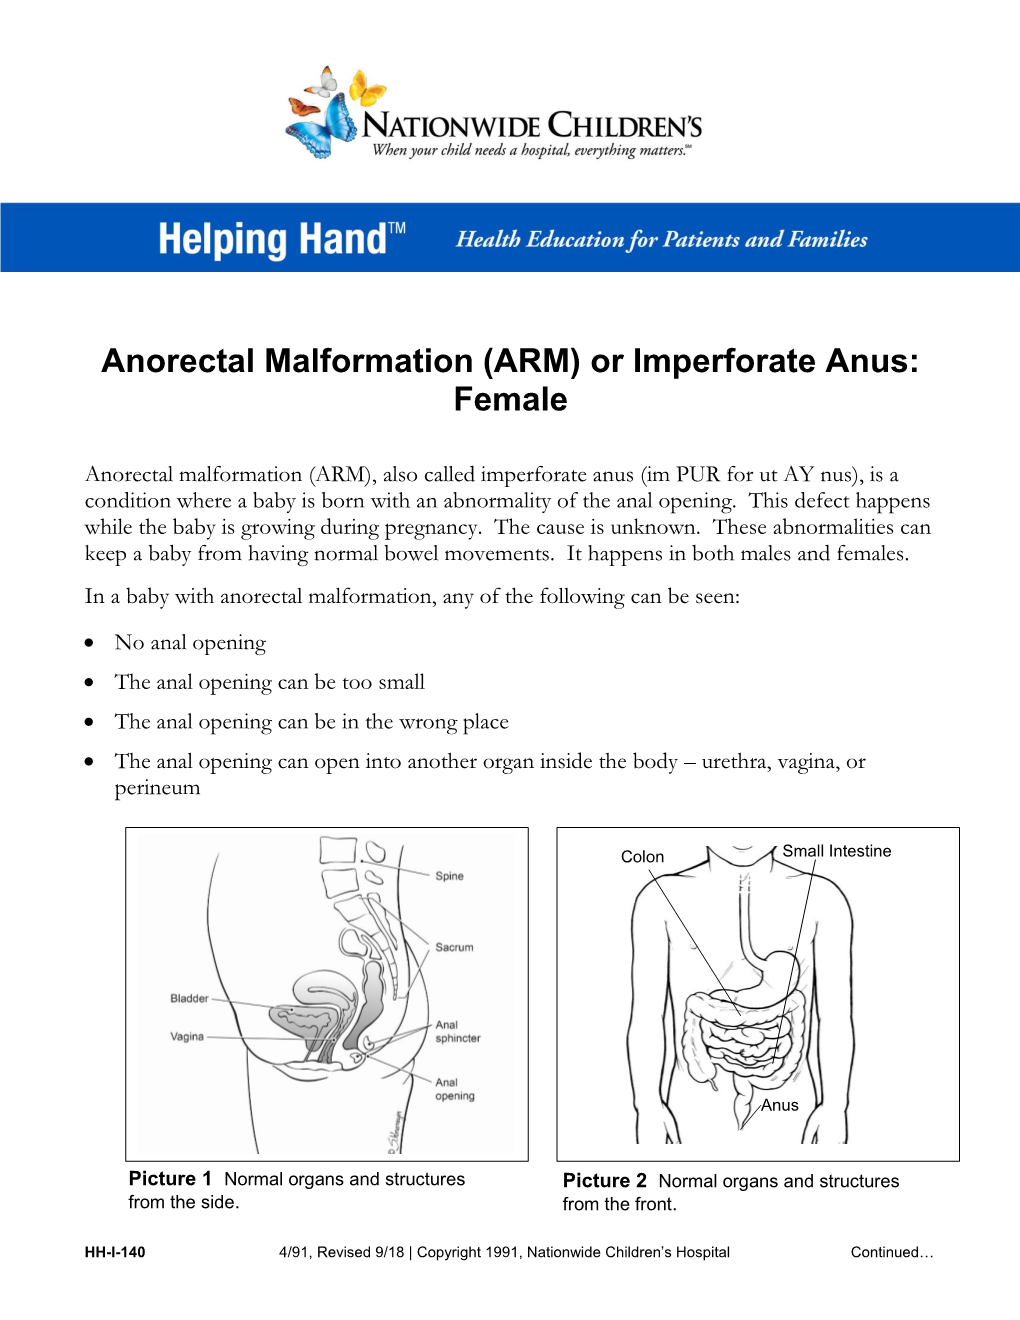 Anorectal Malformation (ARM) Or Imperforate Anus: Female